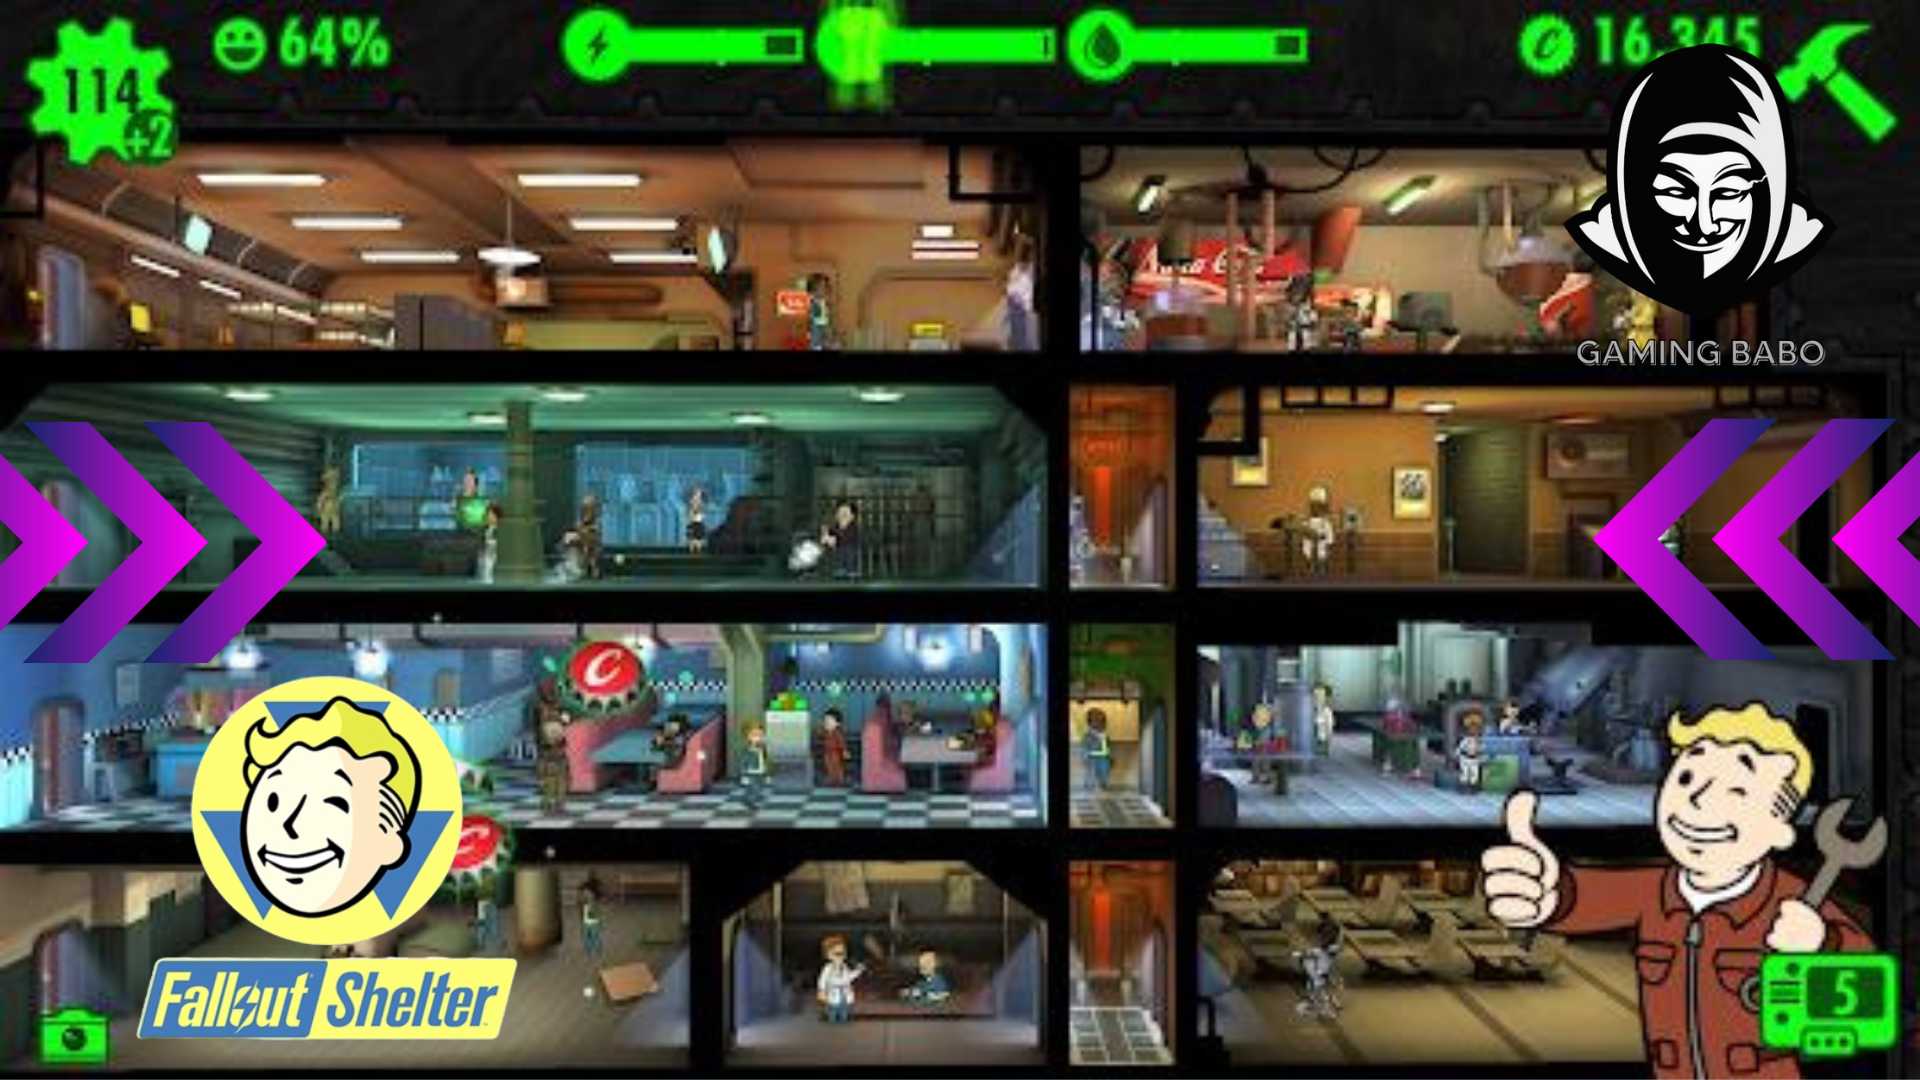 Fallout Shelter tips and tricks